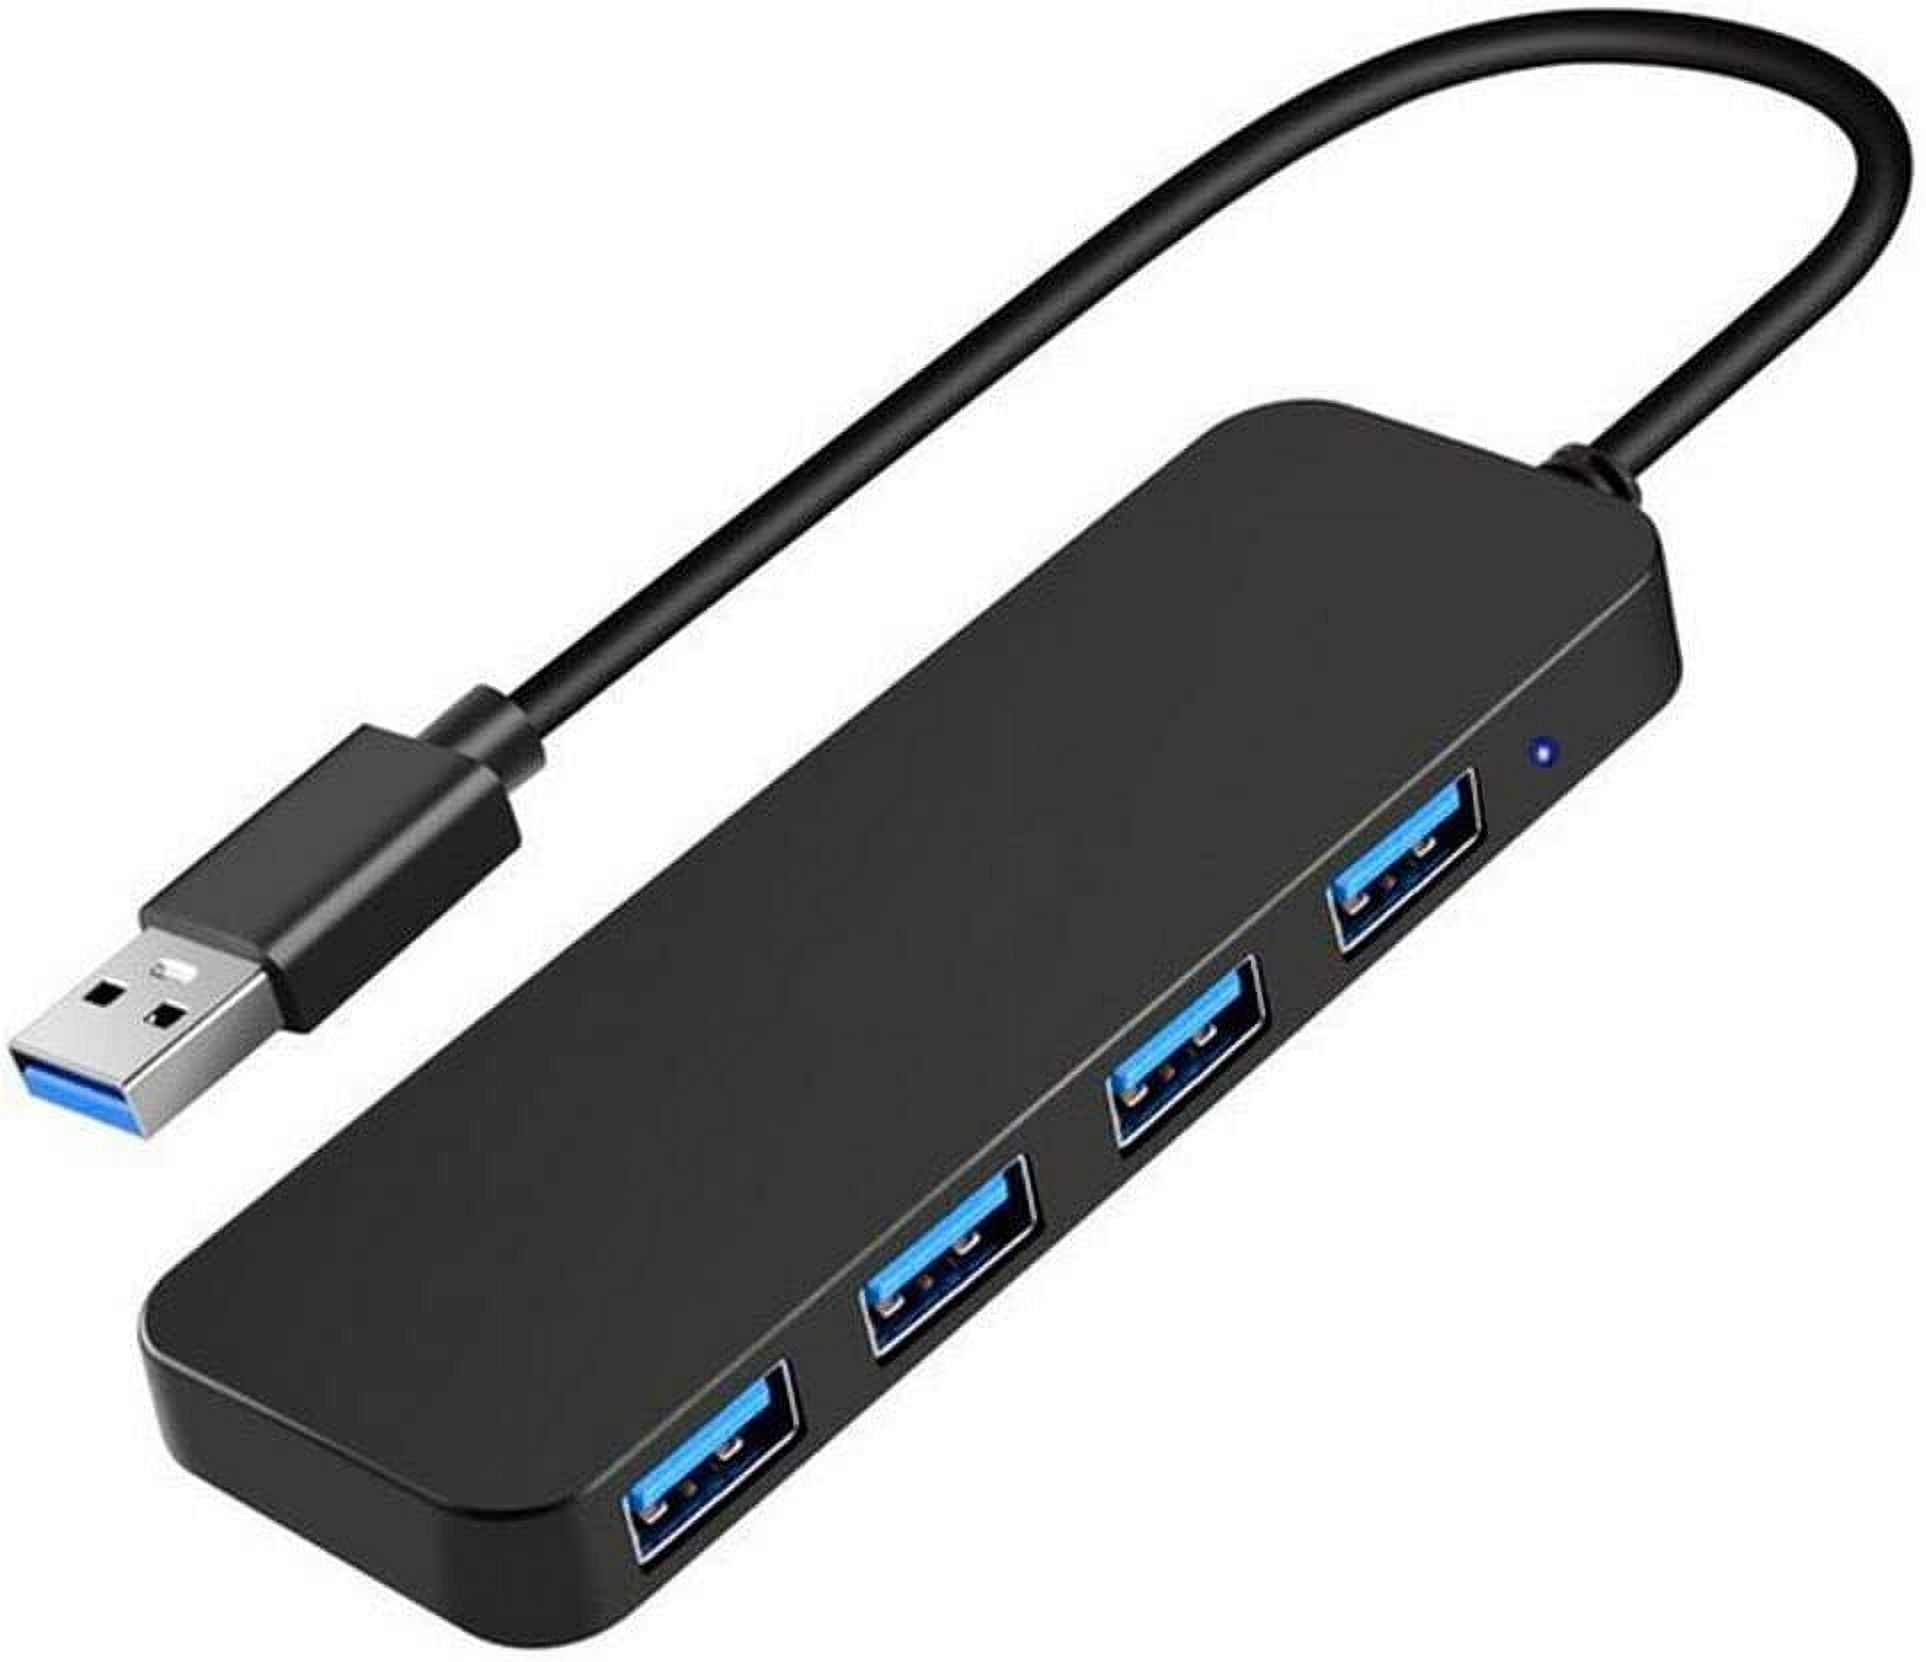 USB Hub 3.0 Splitter,7 Port USB Data Hub with Individual On/Off Switches  and Lights for Laptop, PC, Computer, Mobile HDD, Flash Drive and More